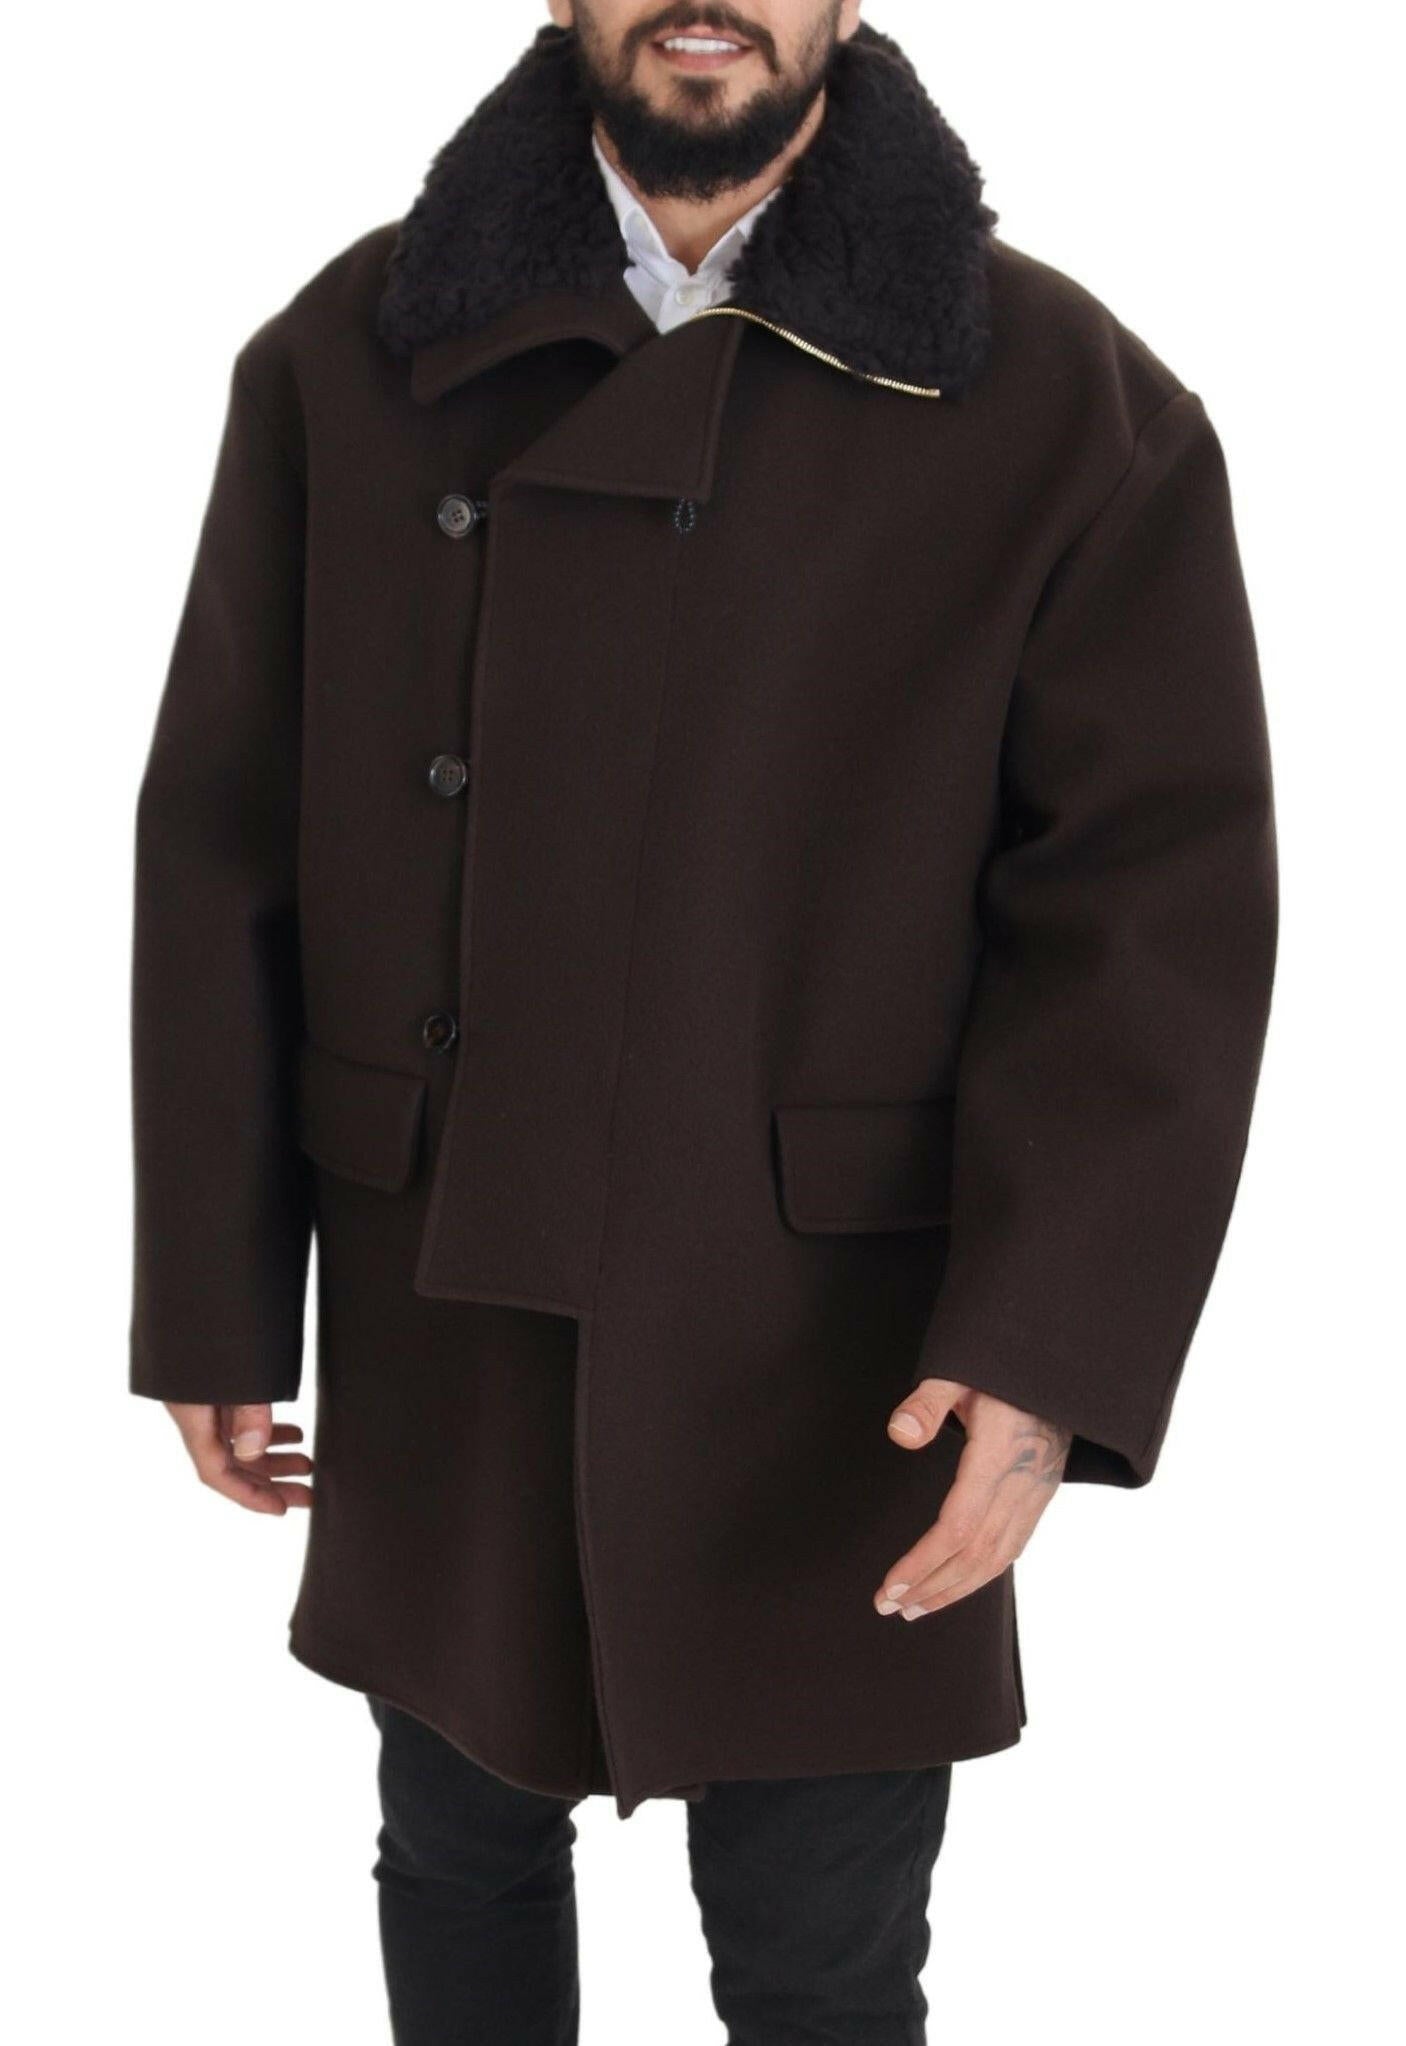 Dolce & Gabbana Brown Double Breasted Shearling Coat Jacket - GENUINE AUTHENTIC BRAND LLC  